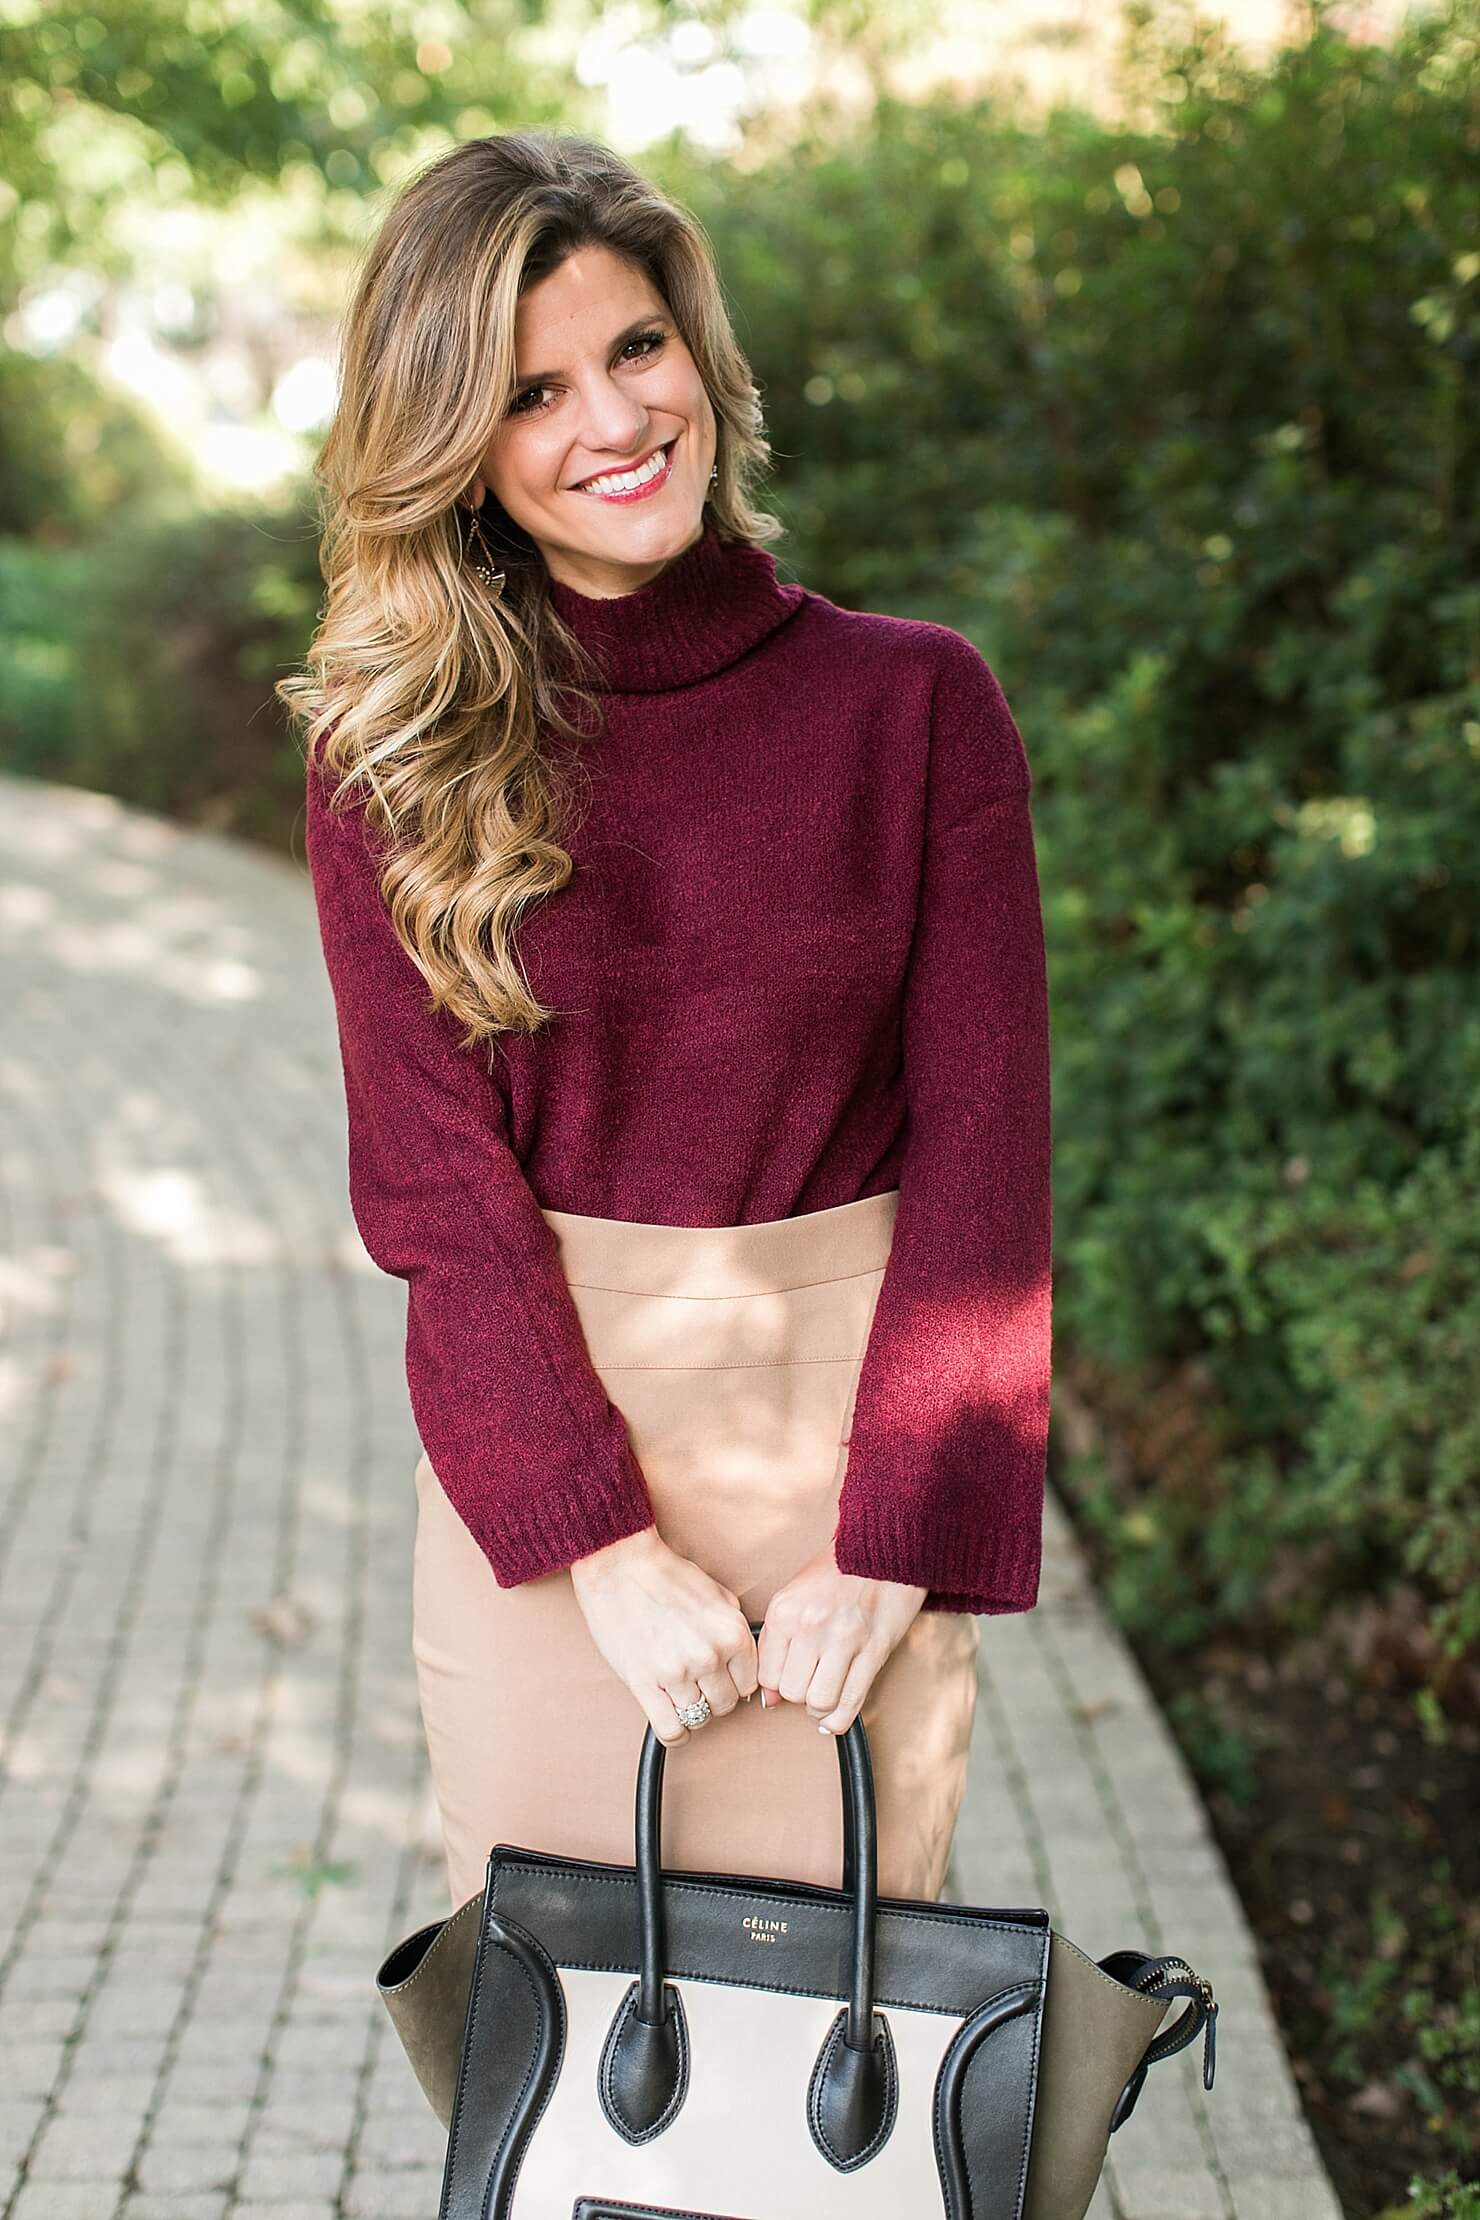 tan pencil skirt and burgundy sweater for business snappy attire